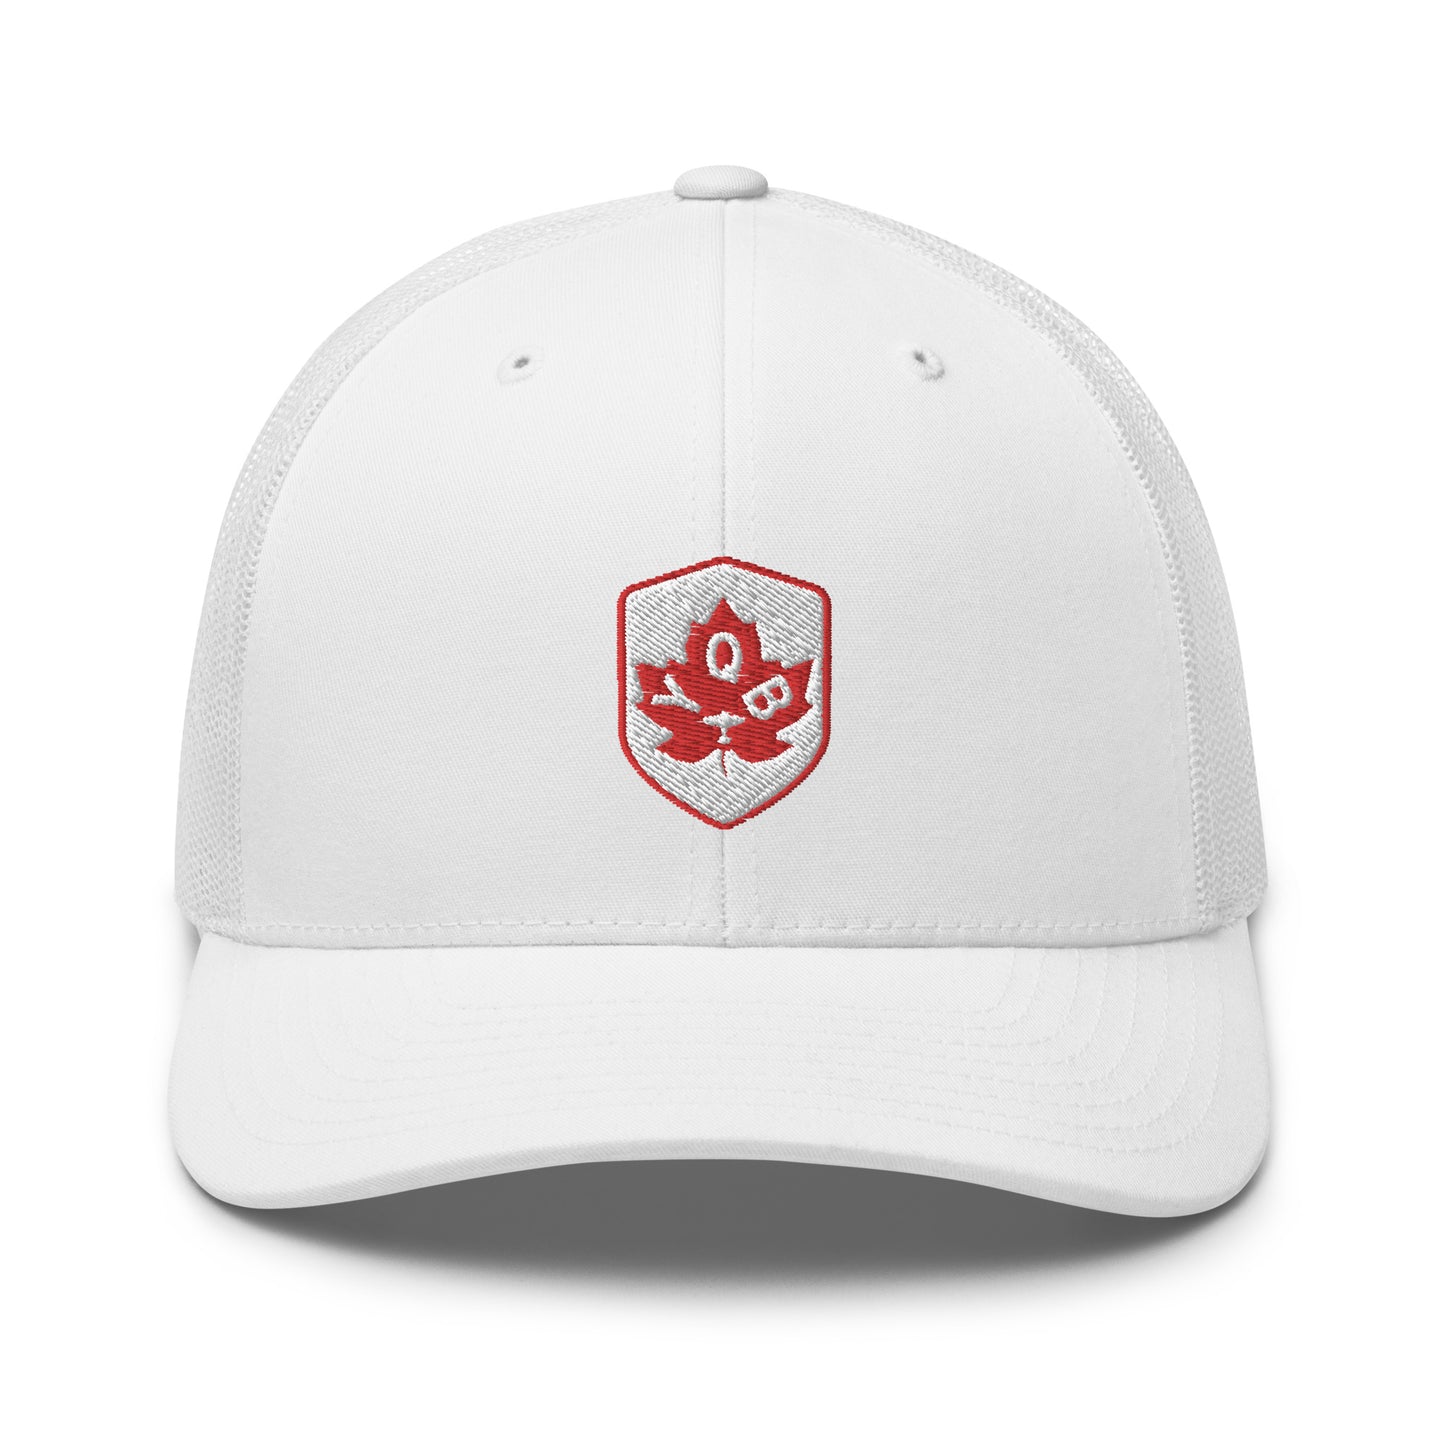 Maple Leaf Trucker Hat - Red/White • YQB Quebec City • YHM Designs - Image 32